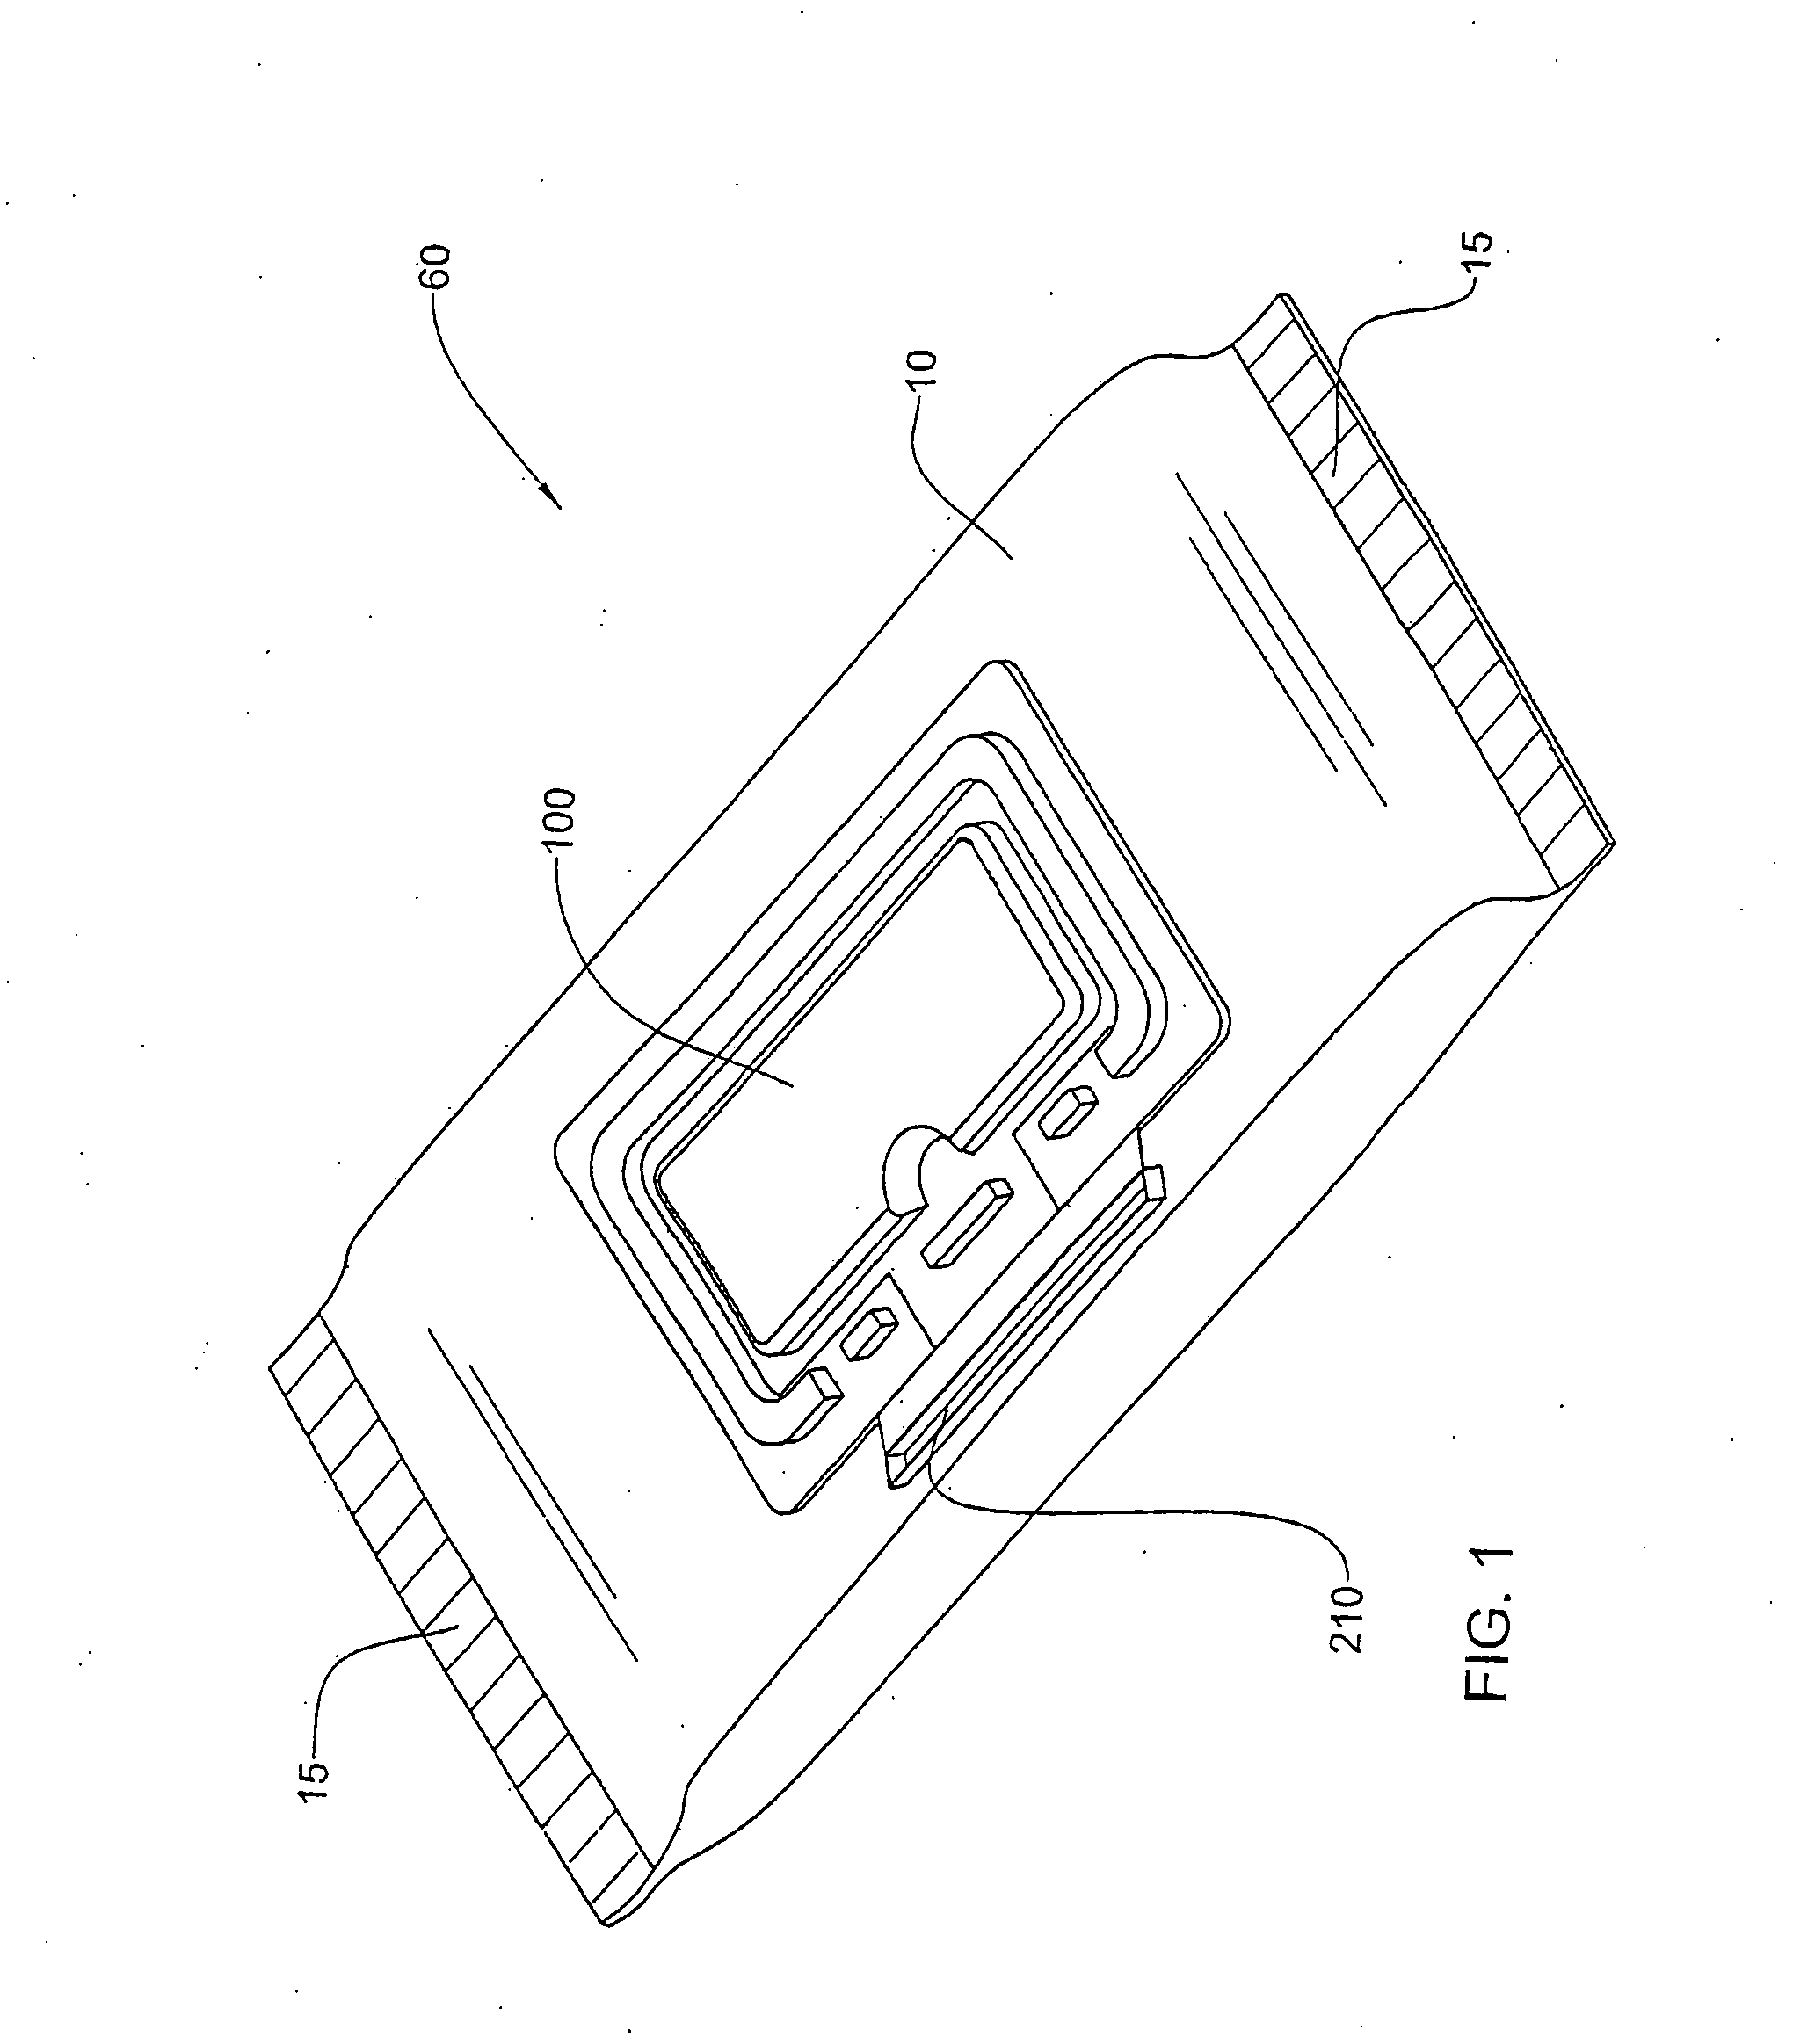 Closure unit, mold for producing same, and dispenser-container incorporating a closure unit